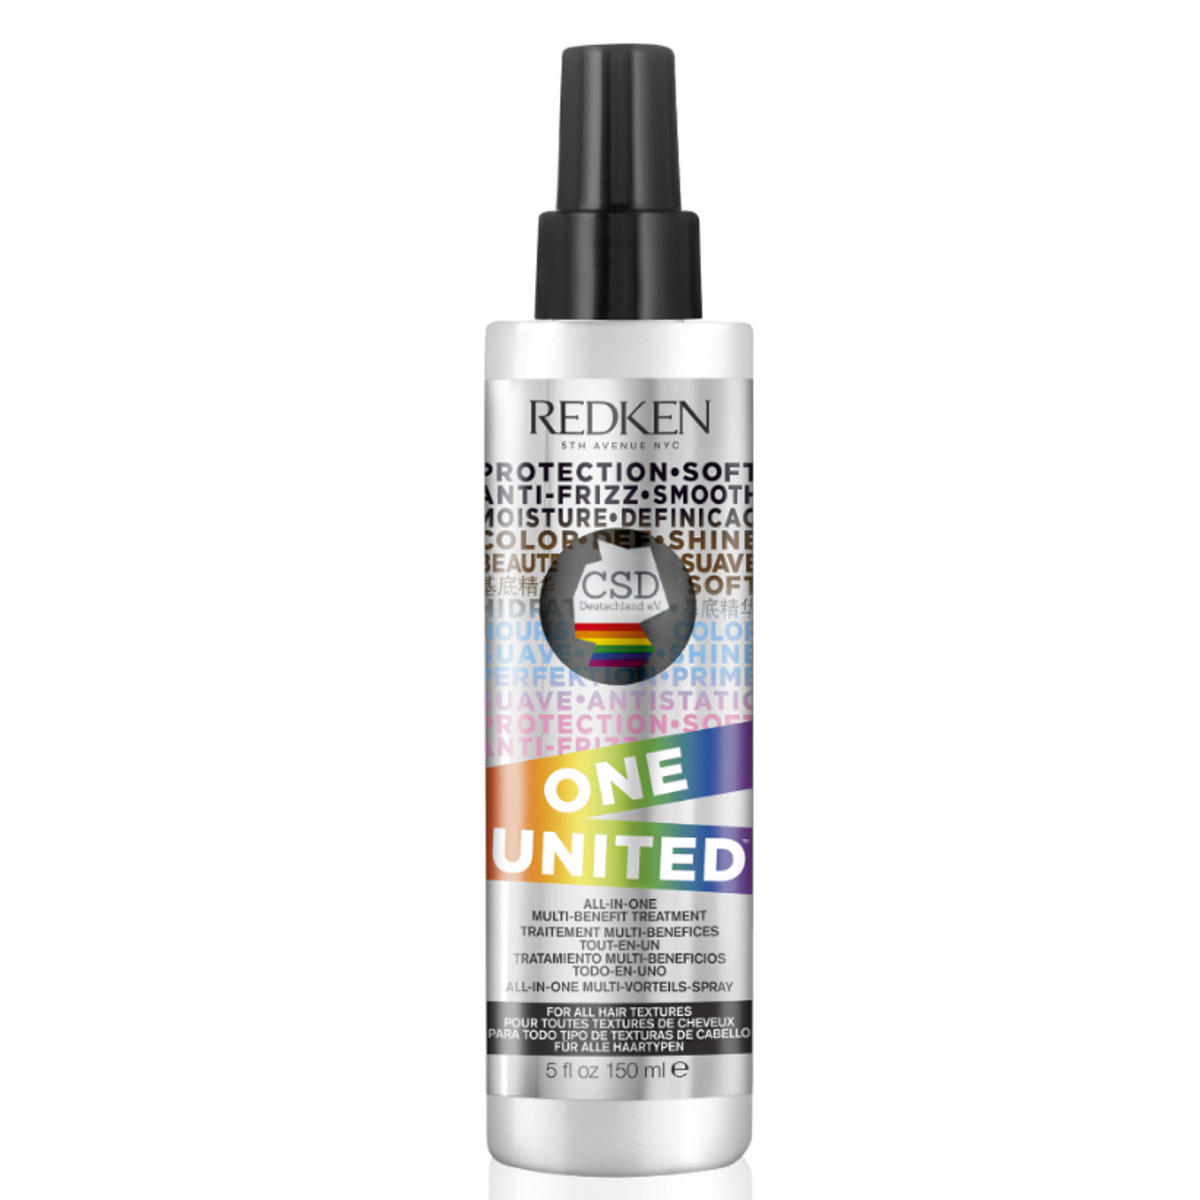 Redken One United All-In-One Multi-Benefit Treatment Pride Limited Edition  150 ml - 1